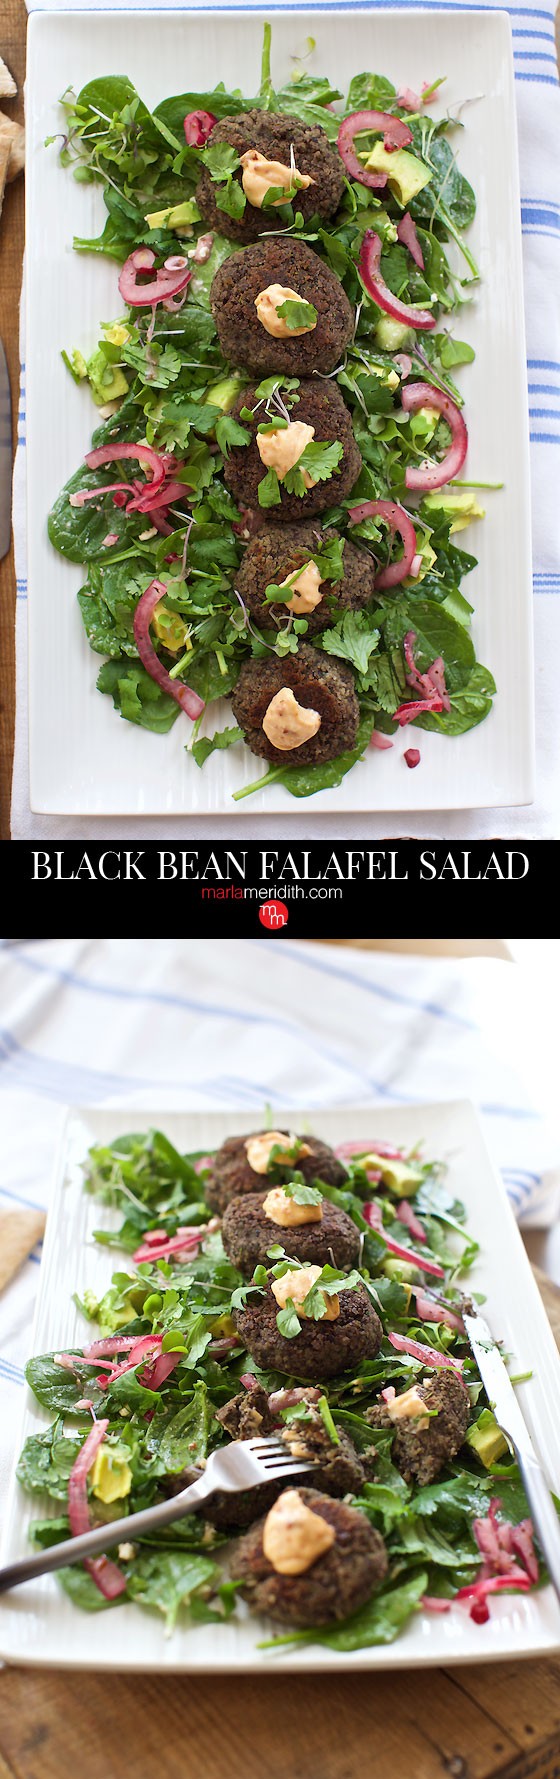 Black Bean Falafel Salad #recipe Perfect for spring entertaining and healthy diets. MarlaMeridith.com ( @marlameridith )